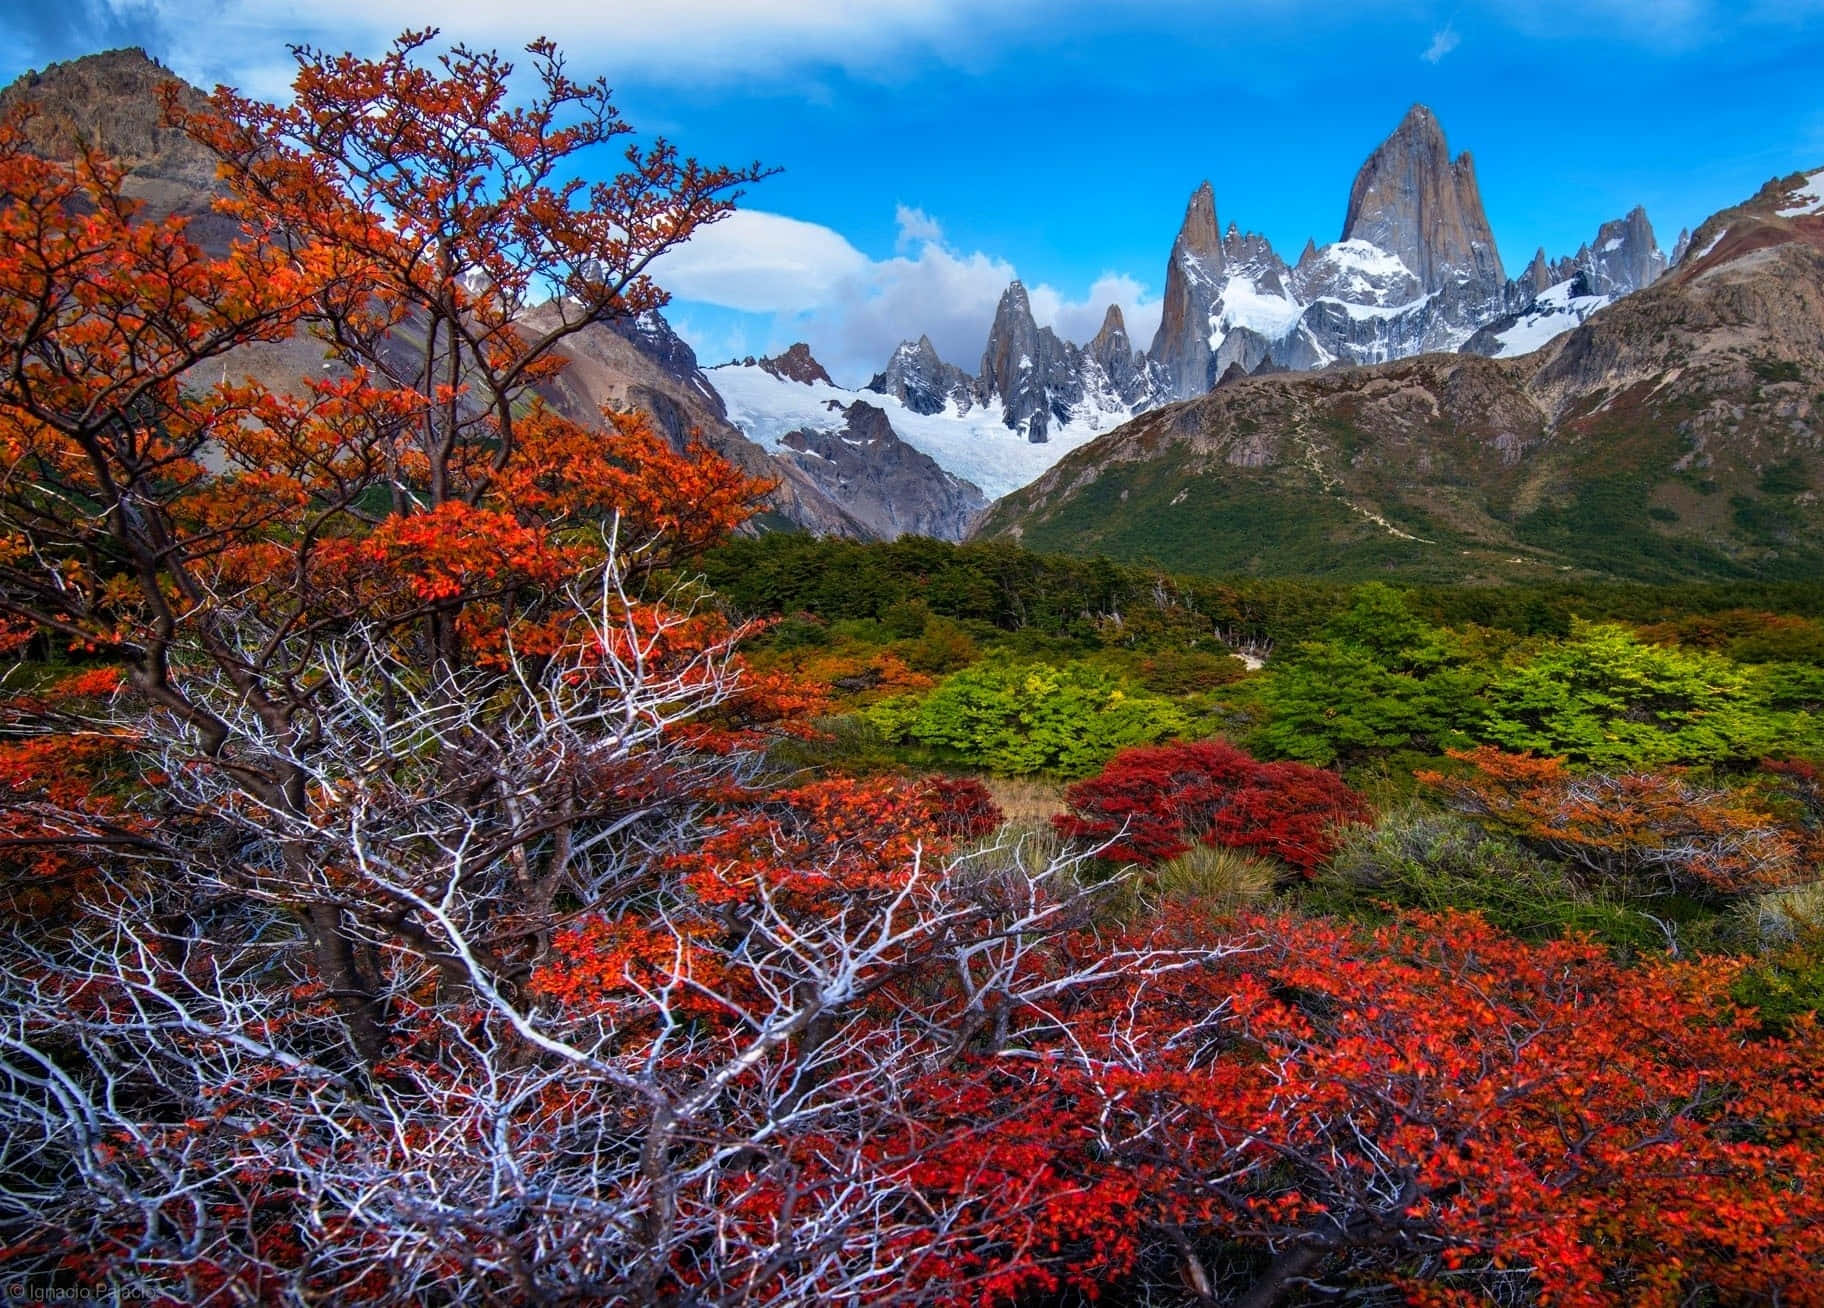 Feel the wonder and beauty of Patagonia.